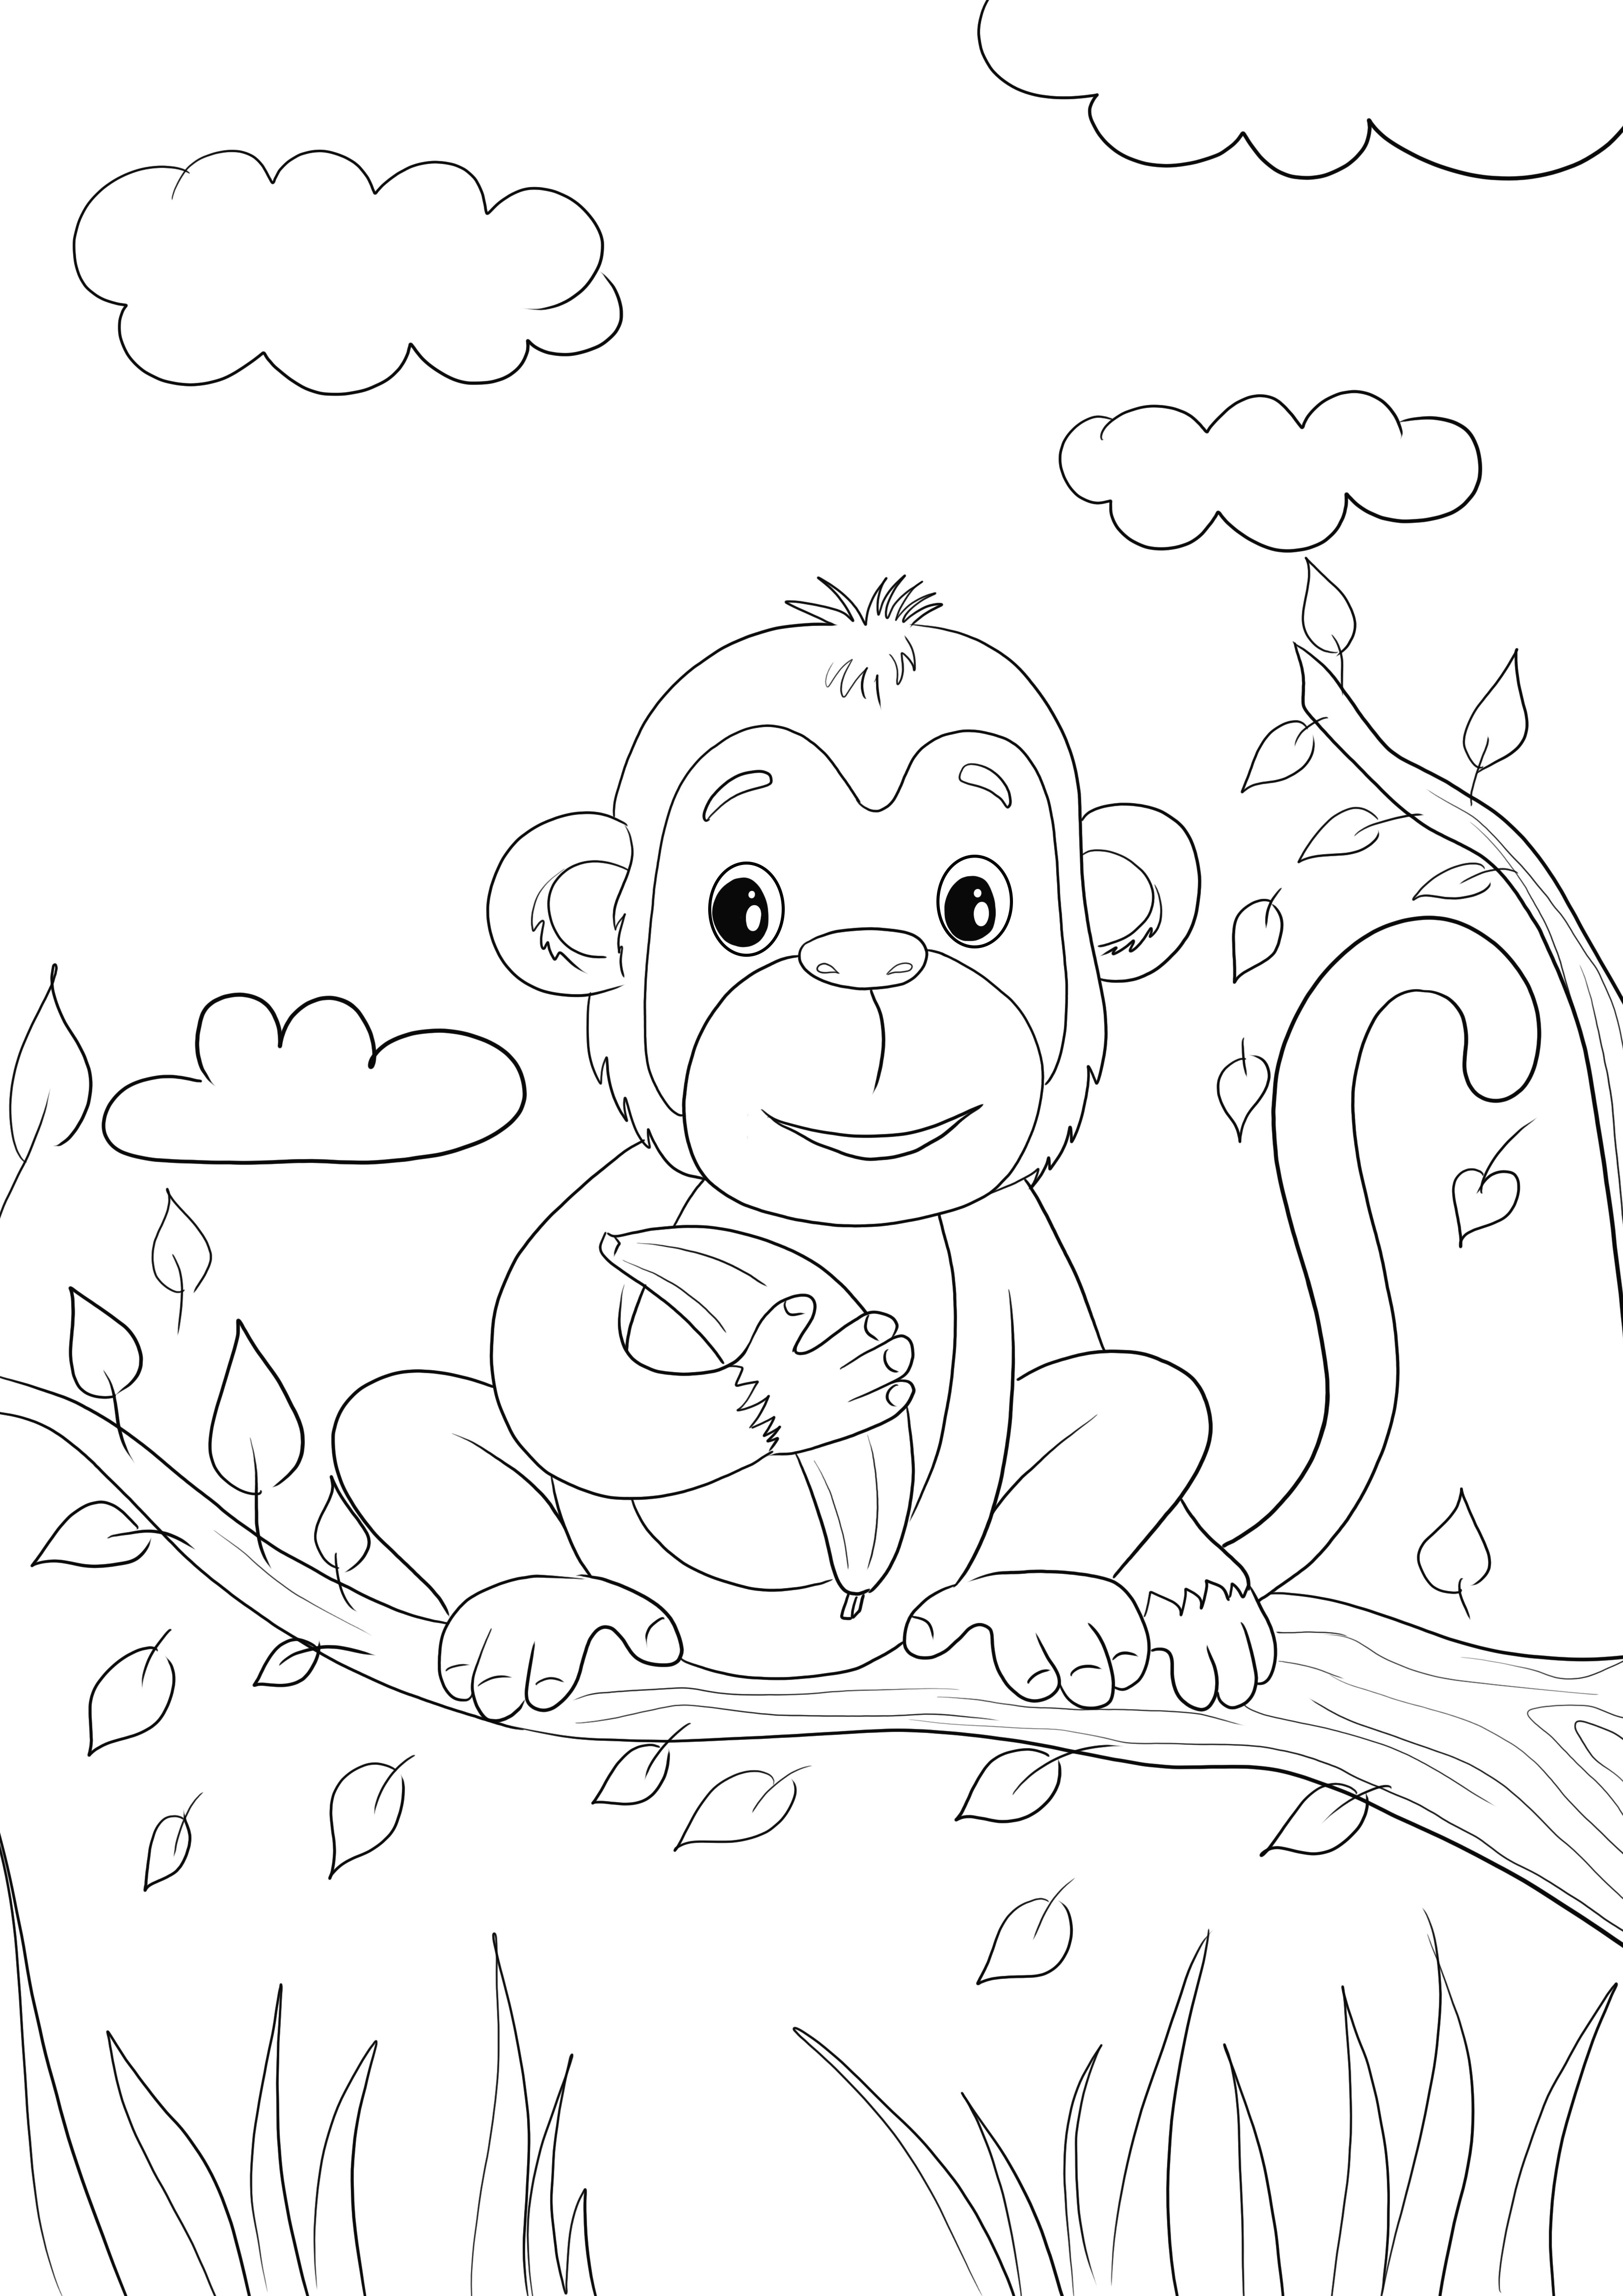 Here is a cute baby monkey holding a banana coloring image free to print or save for later